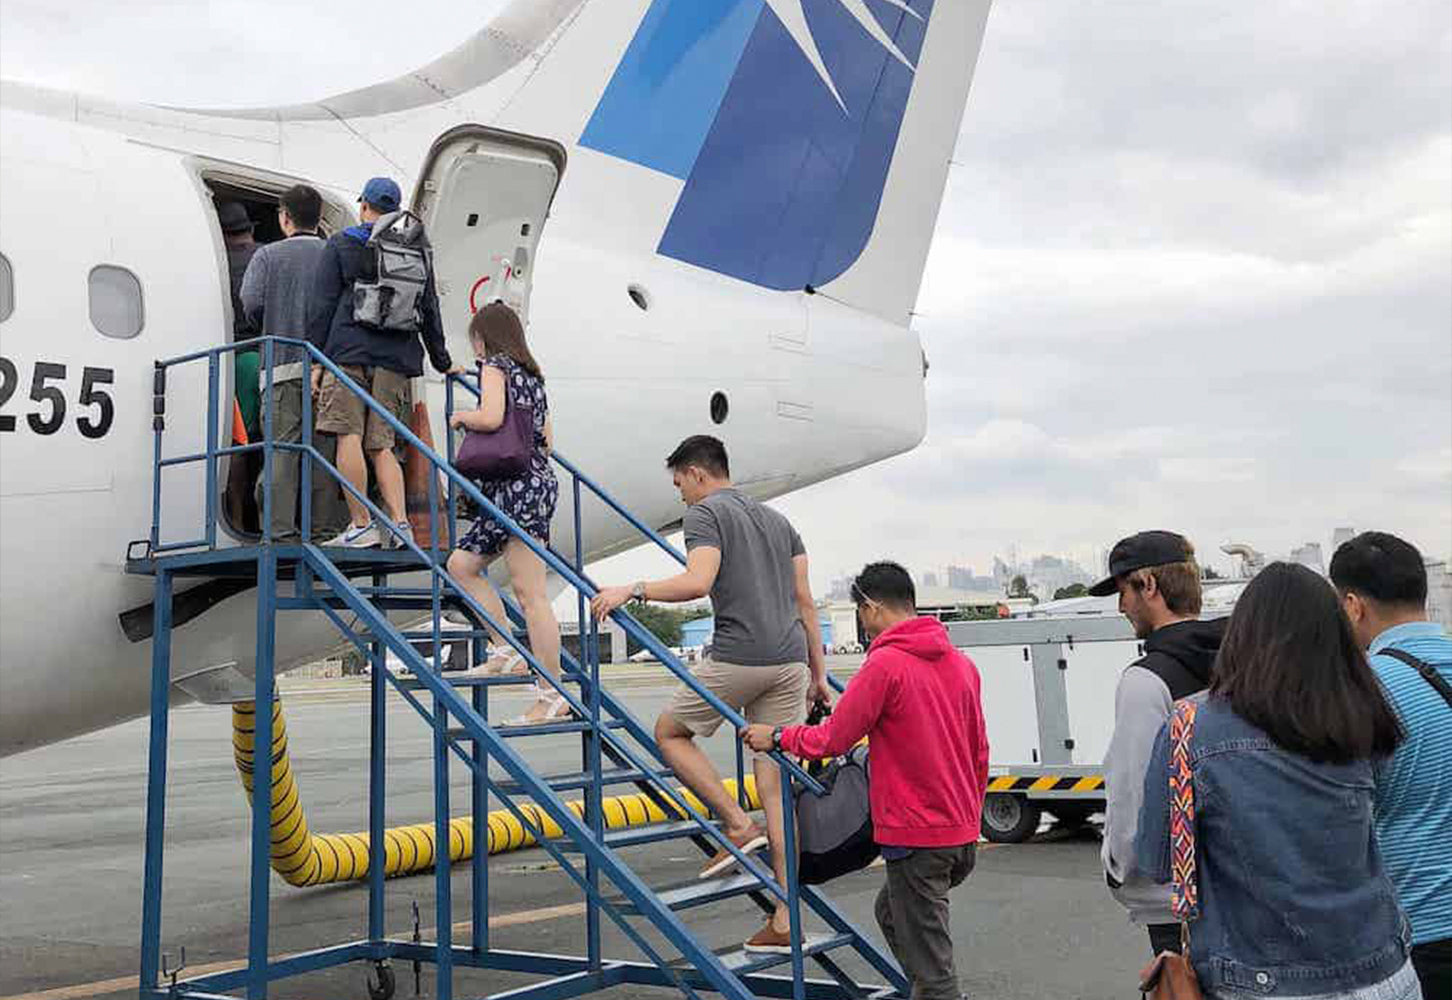 People onboarding an Airplane